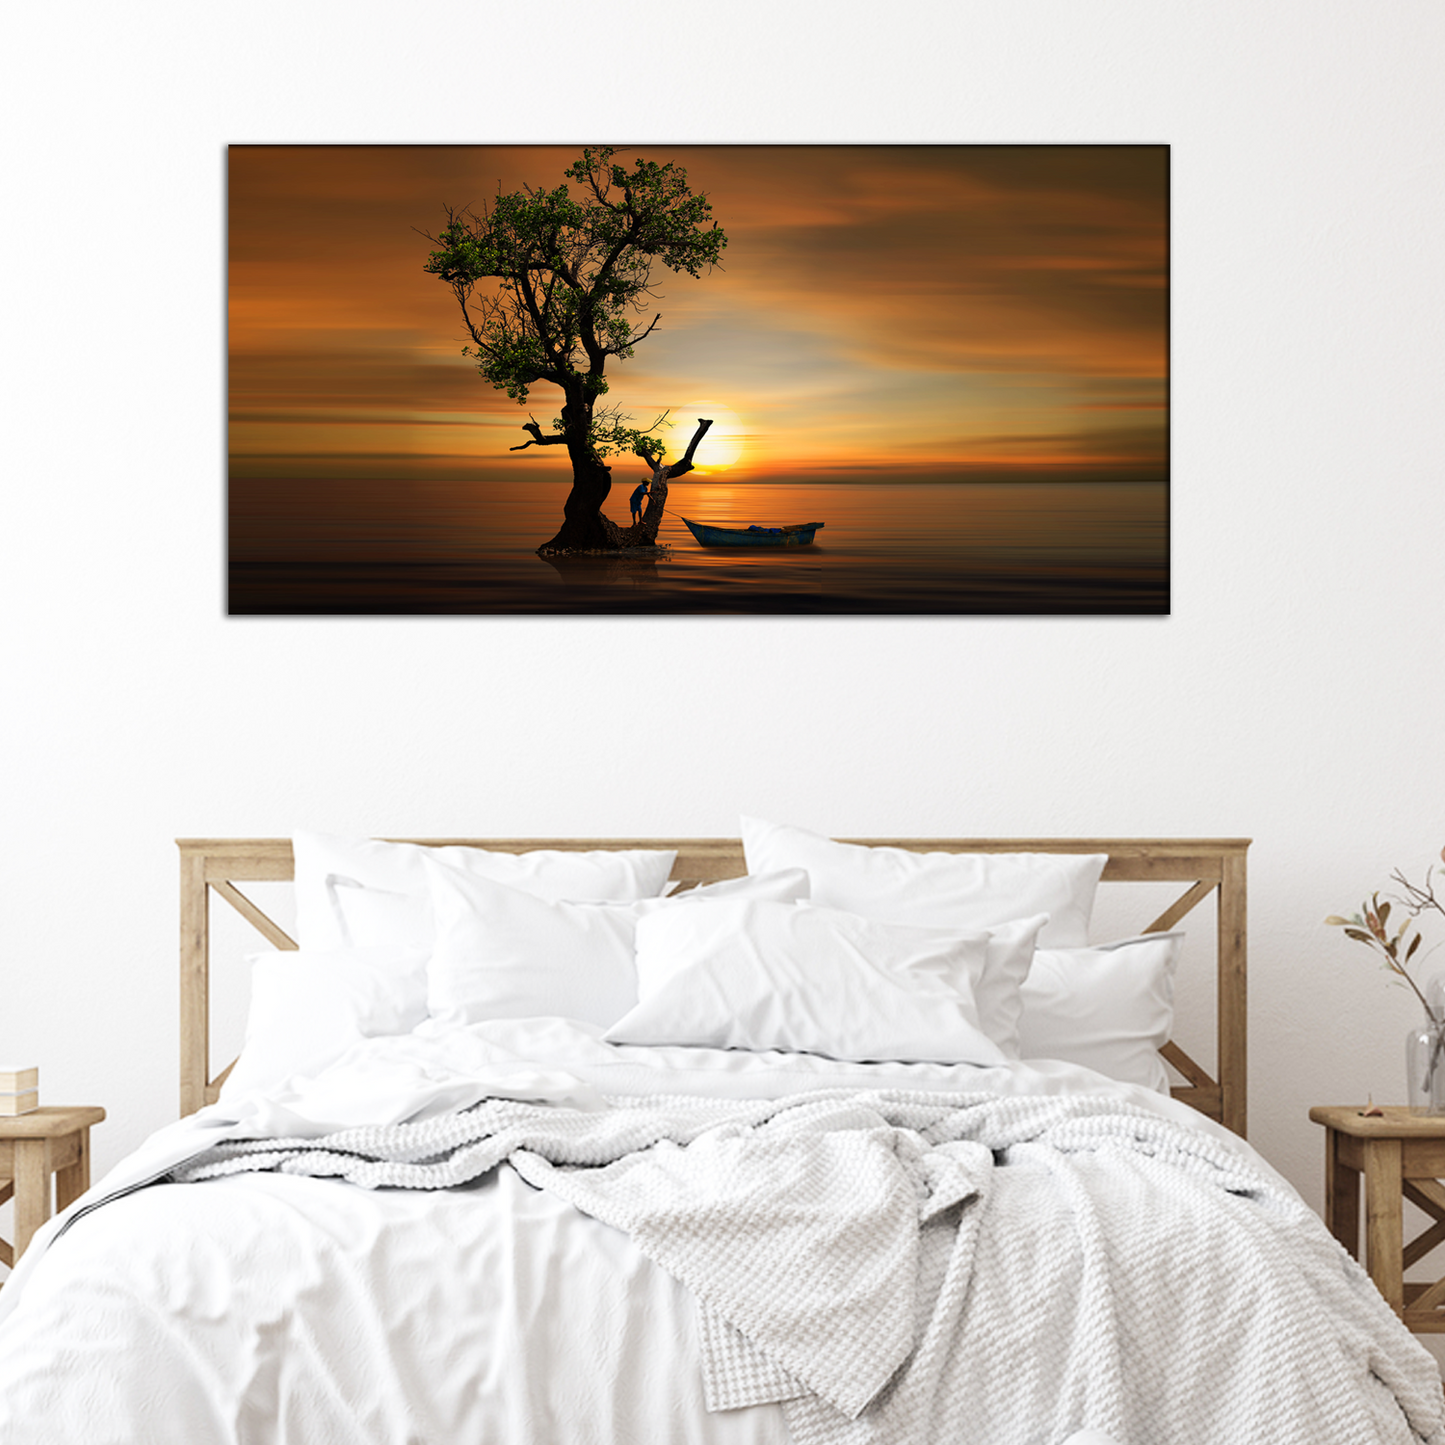 The Boat & Boy With Sunset Canvas Print Wall Painting